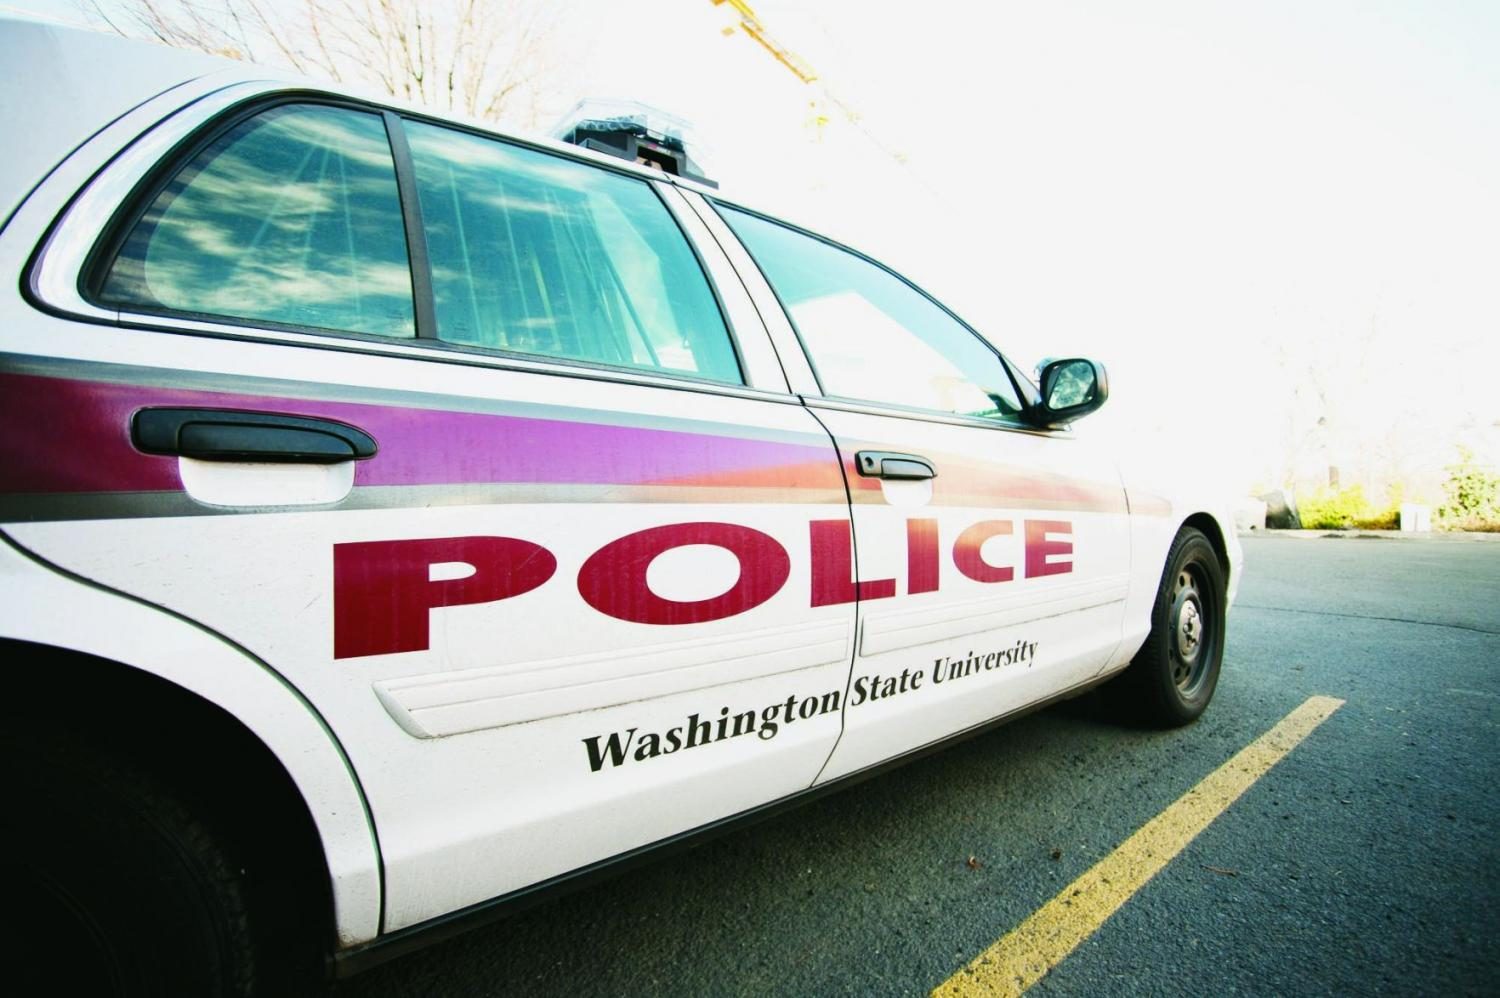 Two+officers+suspended+after+an+alleged+assault+of+WSU+student